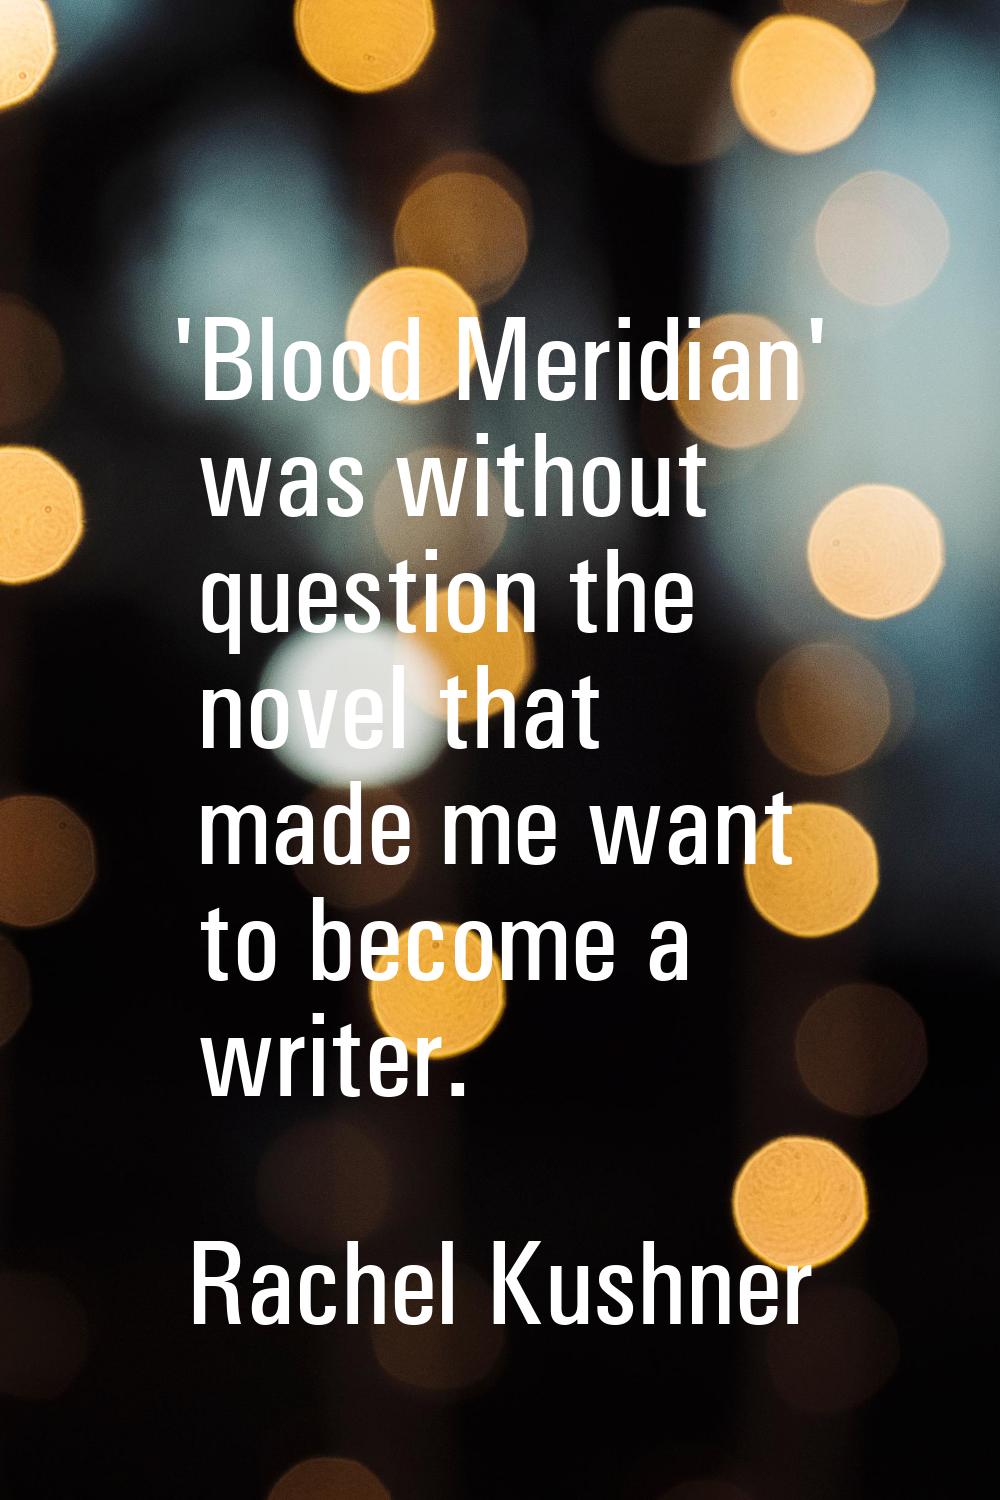 'Blood Meridian' was without question the novel that made me want to become a writer.